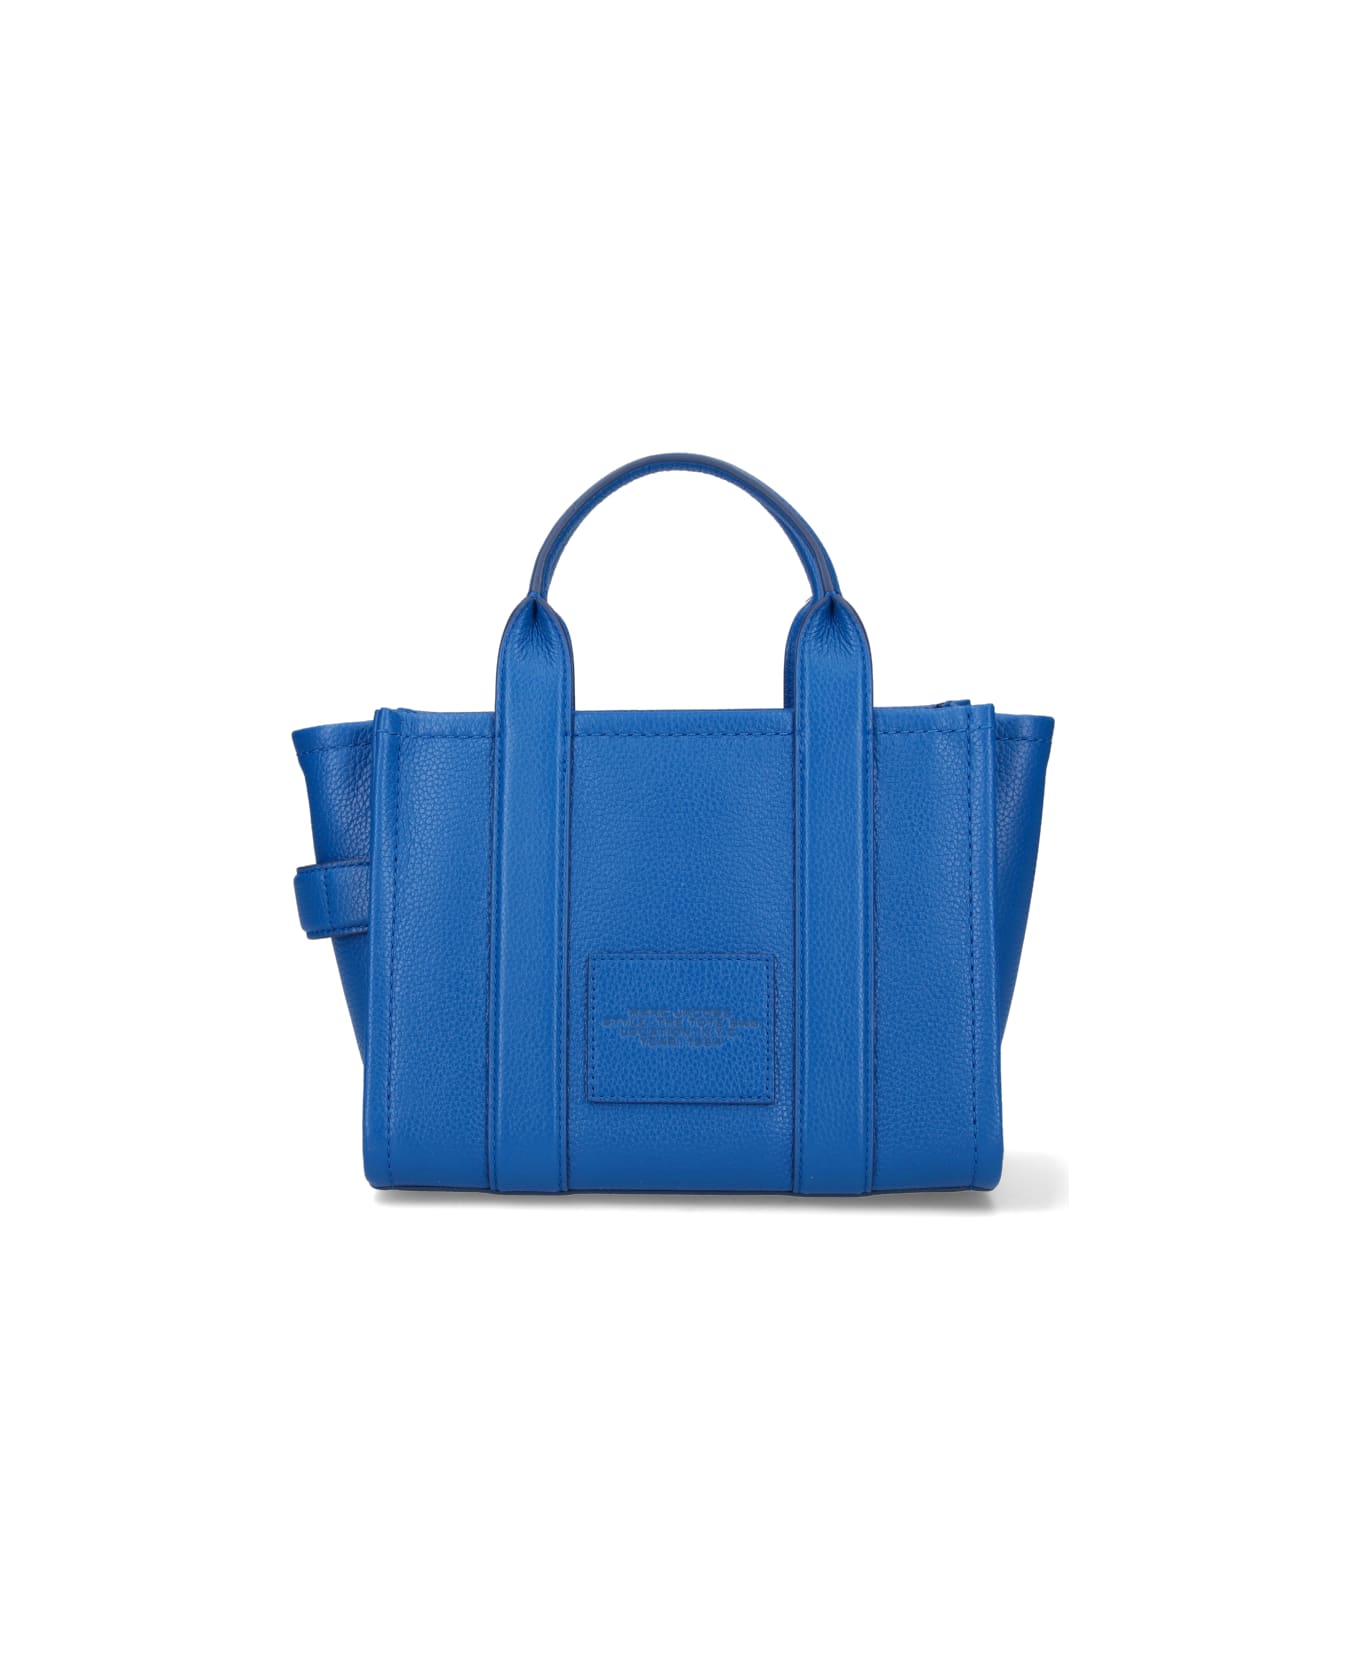 Marc Jacobs The Tote Bag Small - Blue トートバッグ